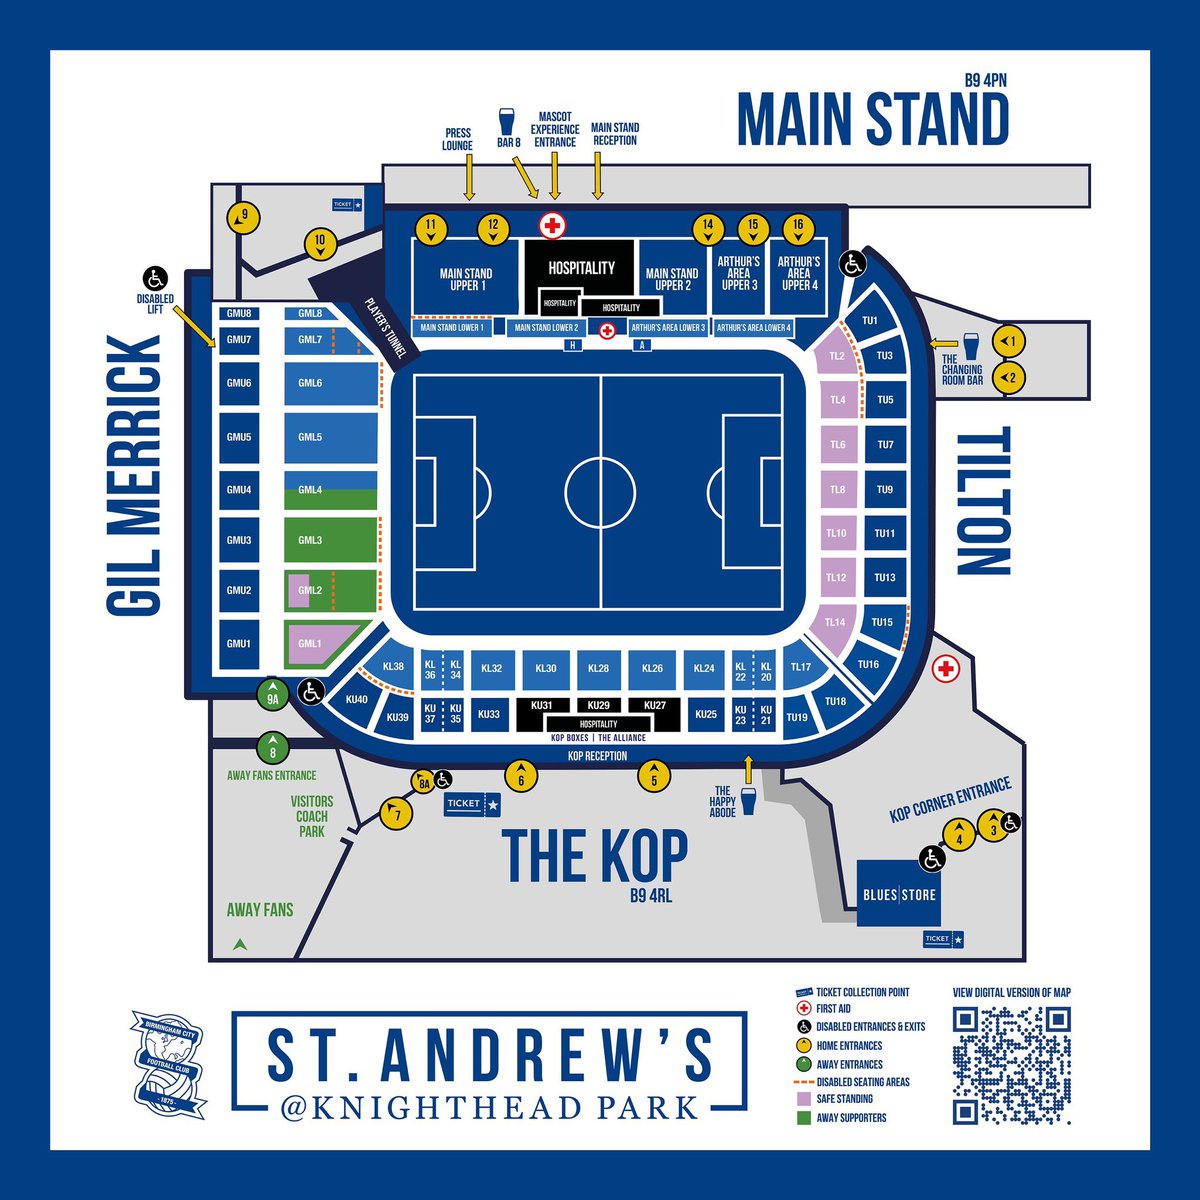 First time visitor to St. Andrew’s @ Knighthead Park? Check out our stadium map. 👇